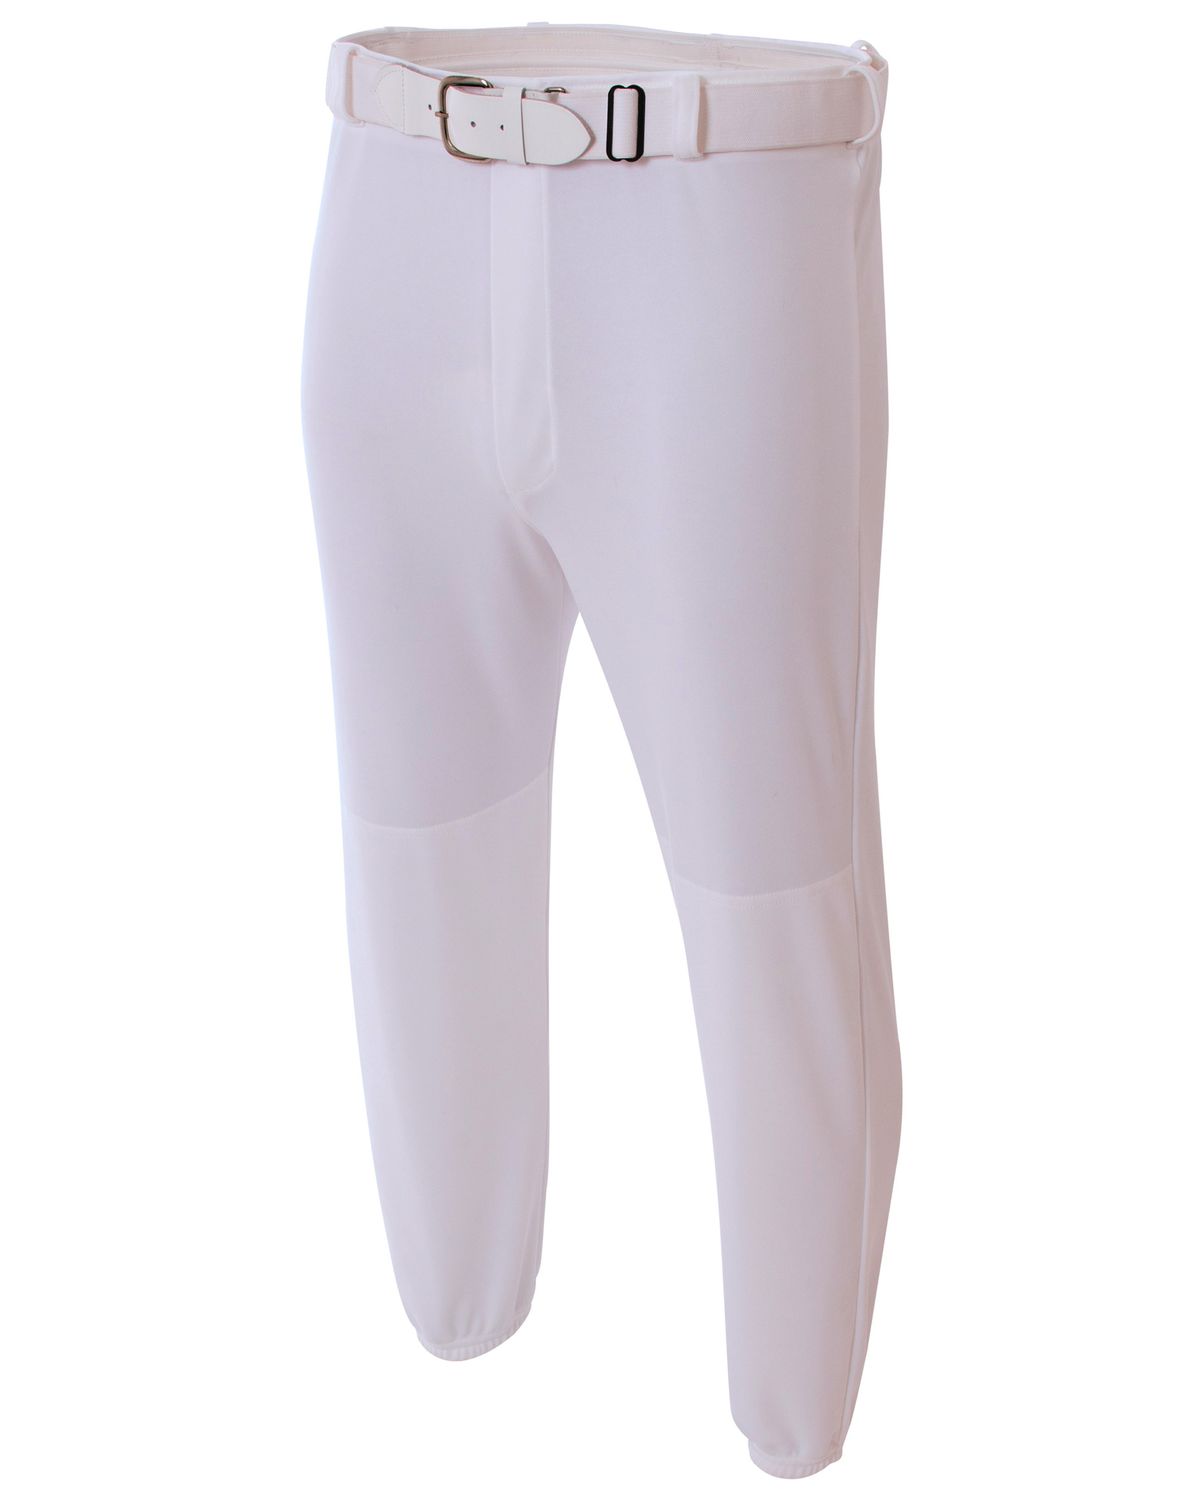 'A4 NB6195 Youth Double Play Polyester Elastic Waist With Belt Loops Baseball Pant'